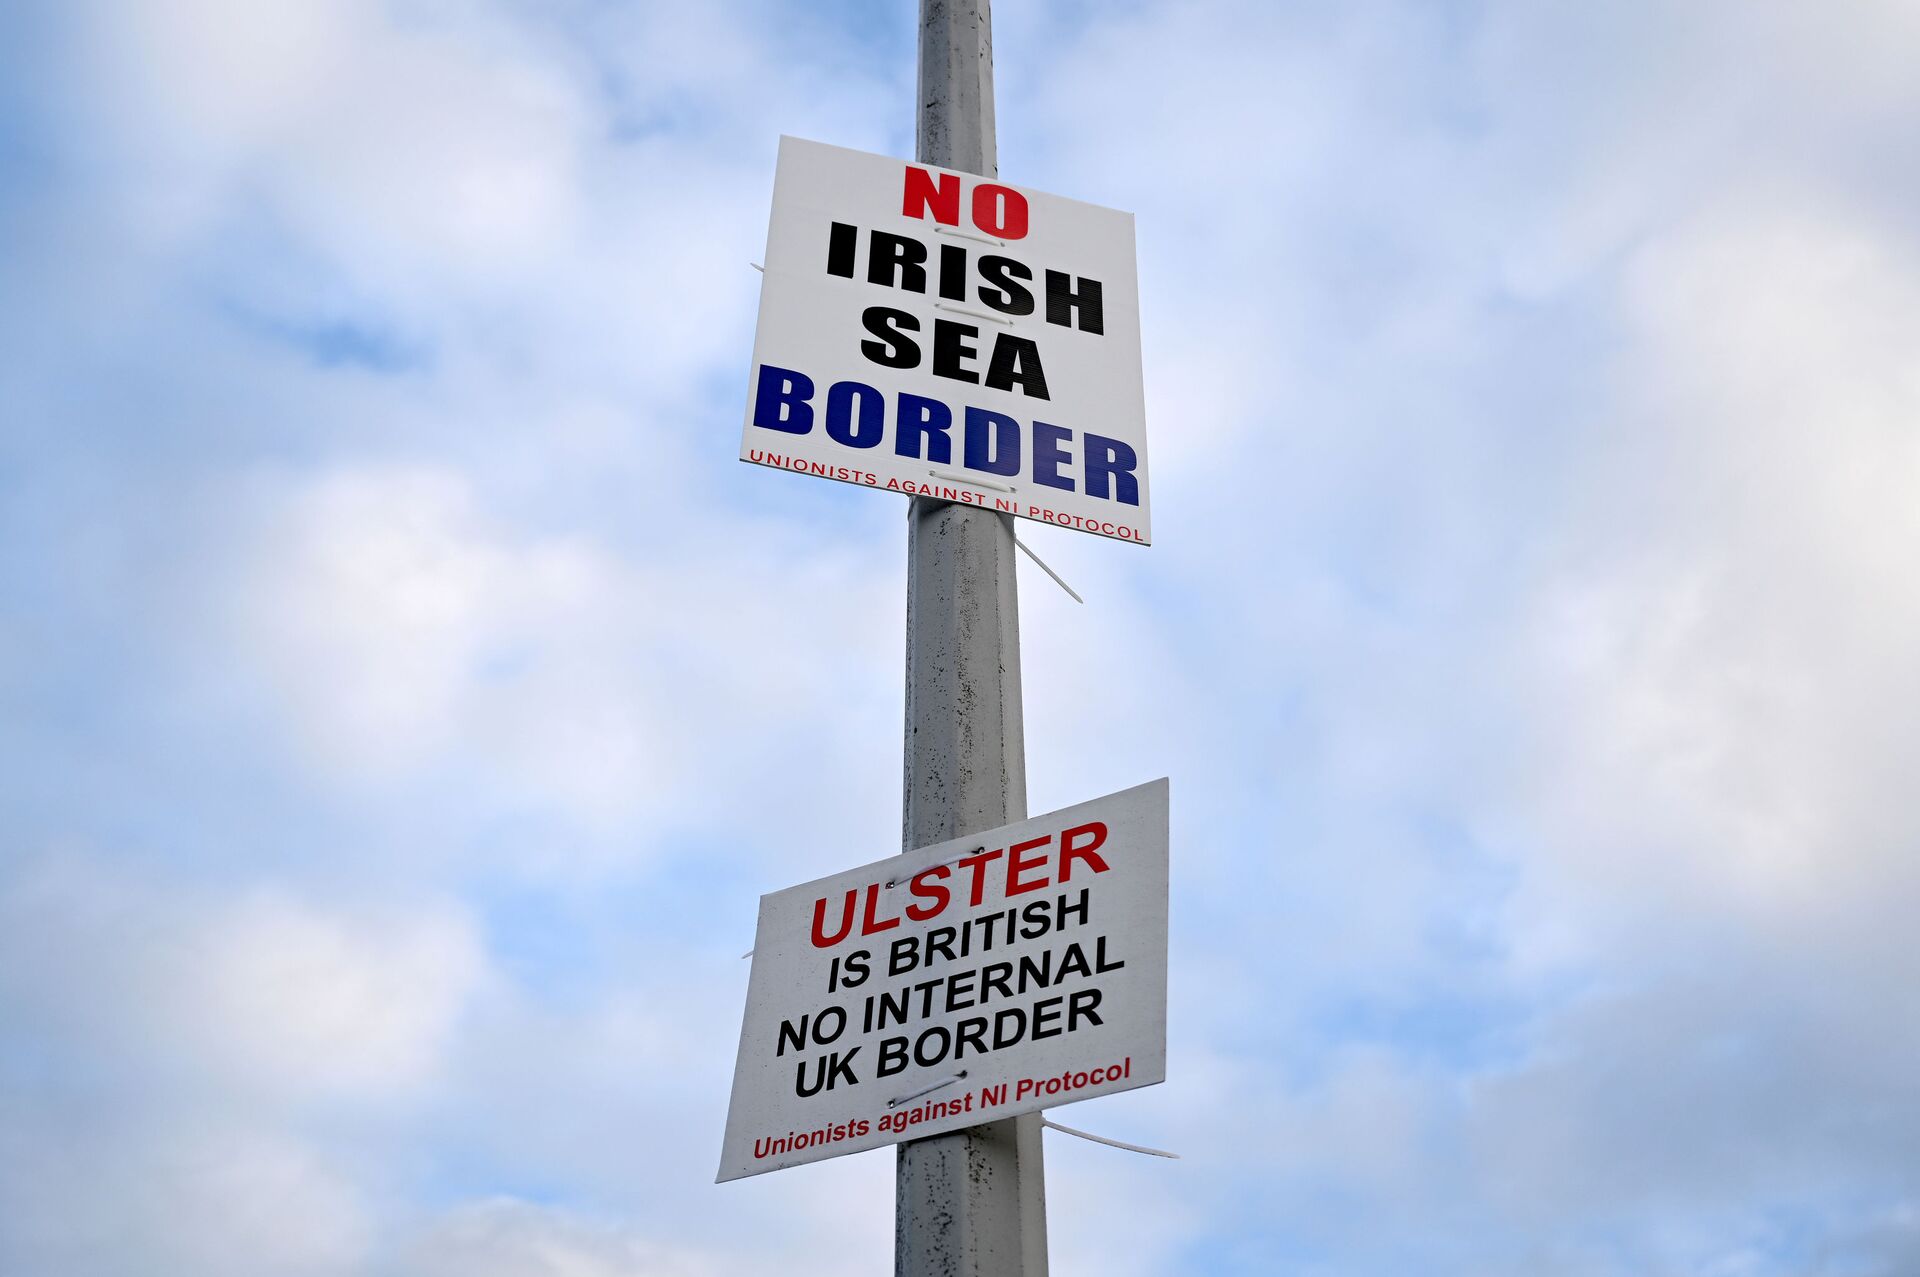 Signs reading 'No Irish Sea border' and 'Ulster is British, no internal UK Border' are seen affixed to a lamp post at the Port of Larne, Northern Ireland, March 6, 2021. Picture taken March 6, 2021 - Sputnik International, 1920, 07.11.2021